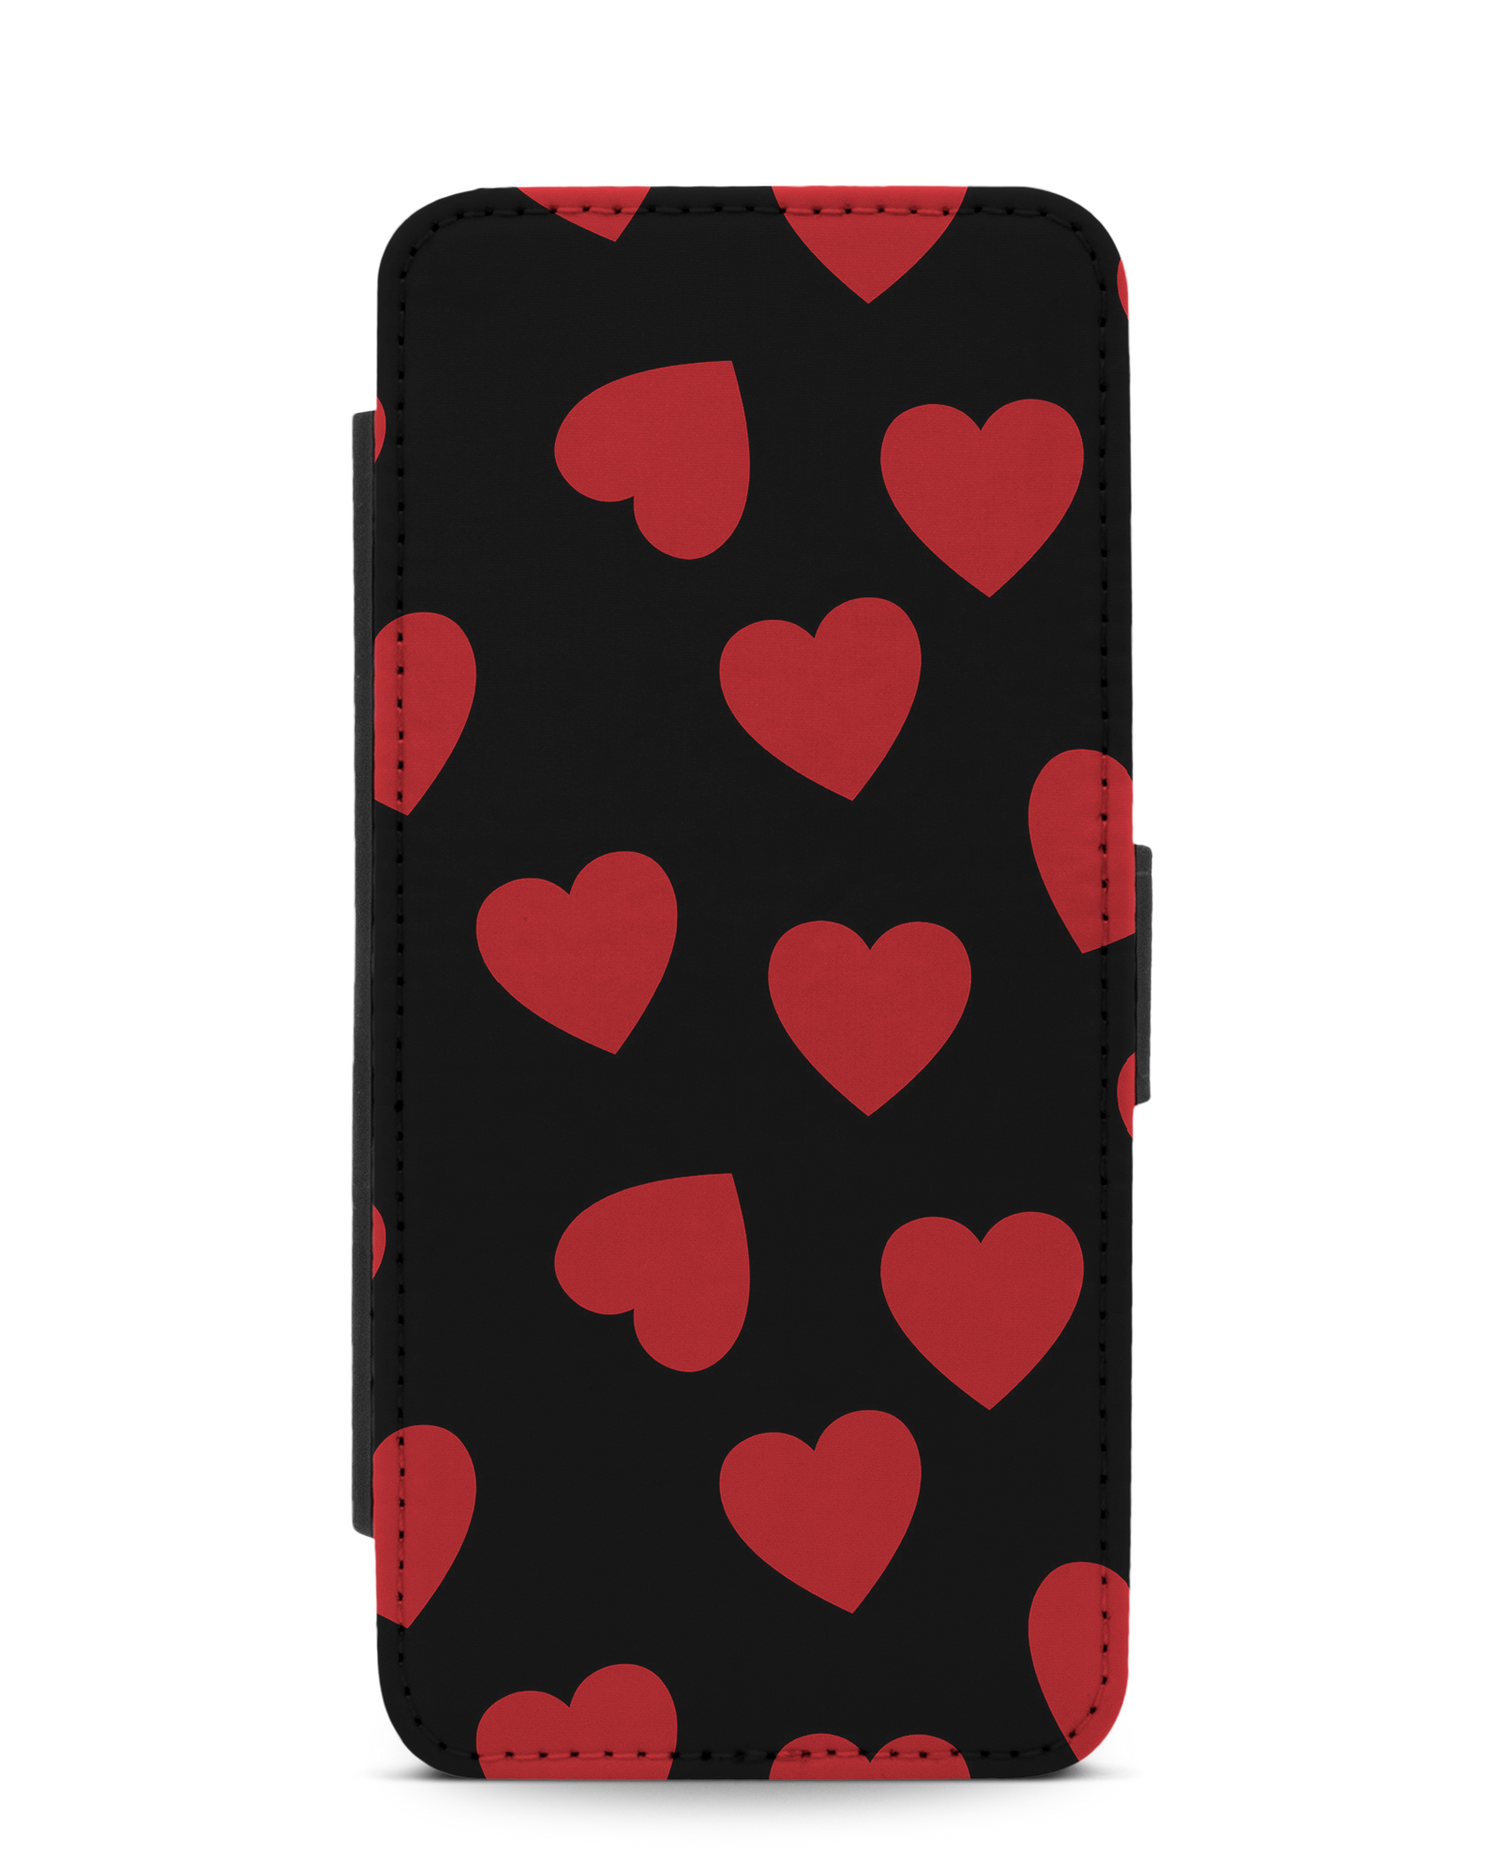 Repeating Hearts Wallet Phone Case Samsung Galaxy S20: Front View